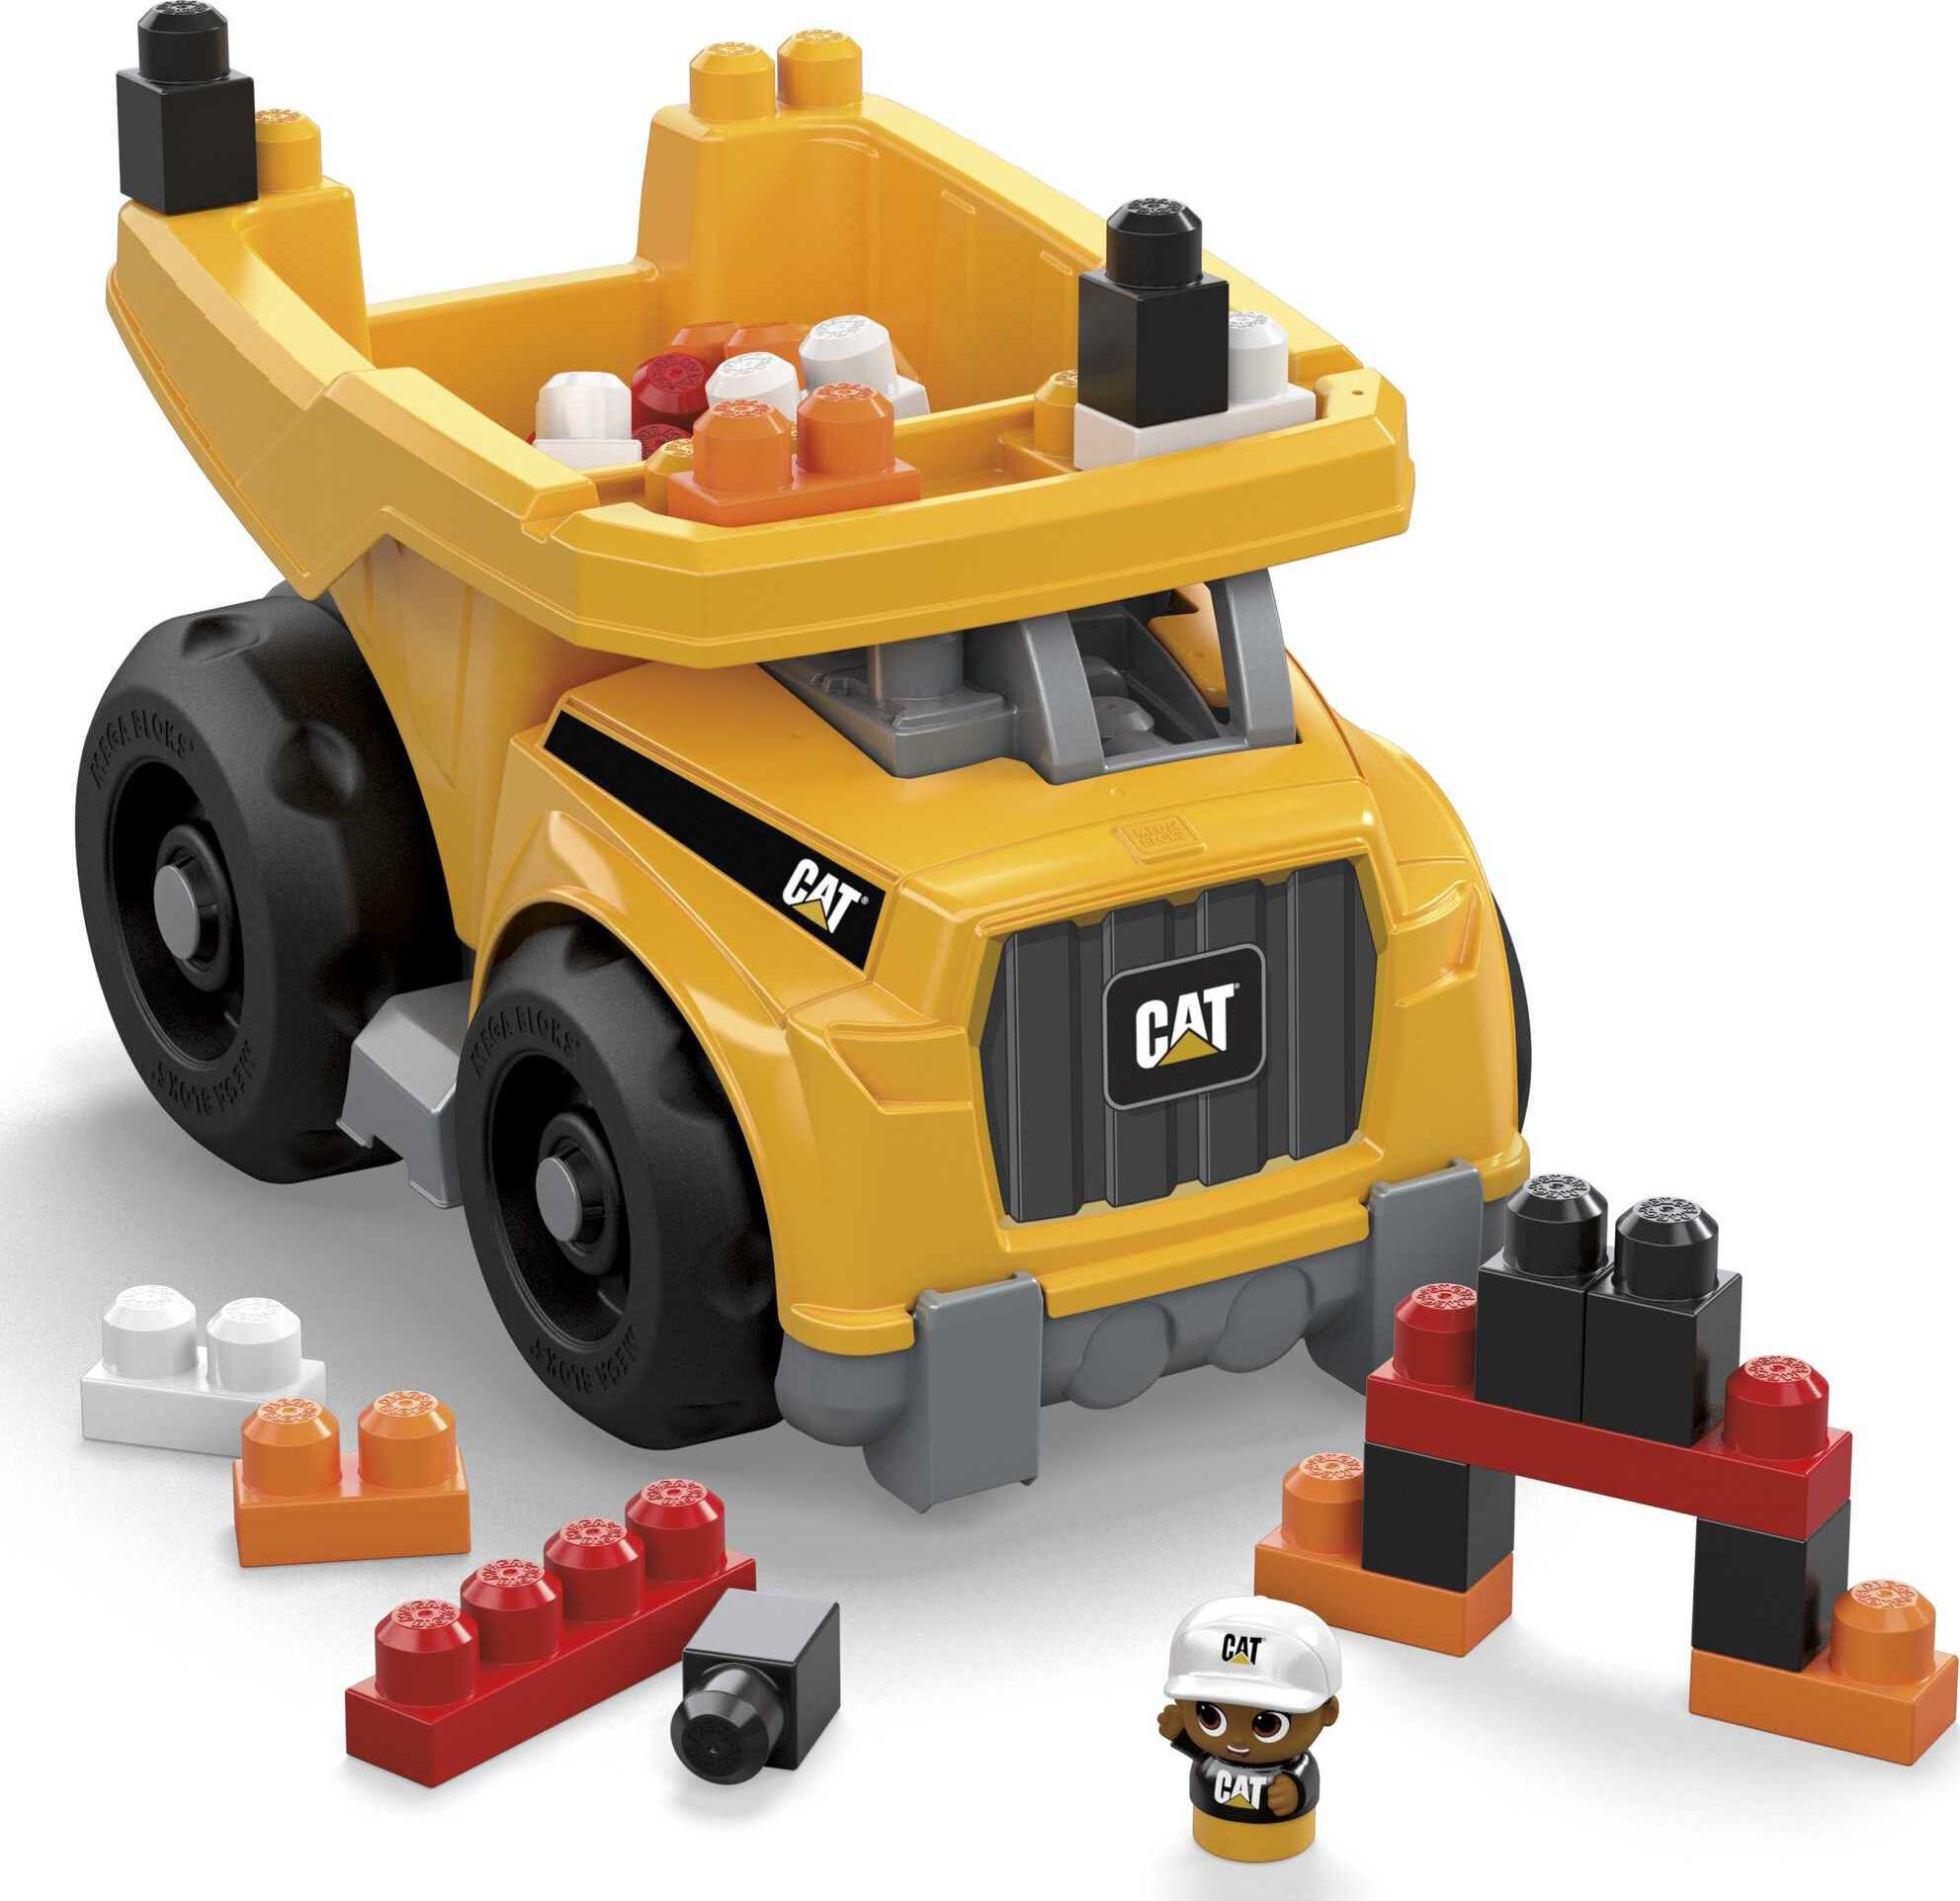 MEGA BLOKS Fisher-Price Building Toy Blocks Cat Large Dump Truck (25 Pieces) For Toddler - image 7 of 7